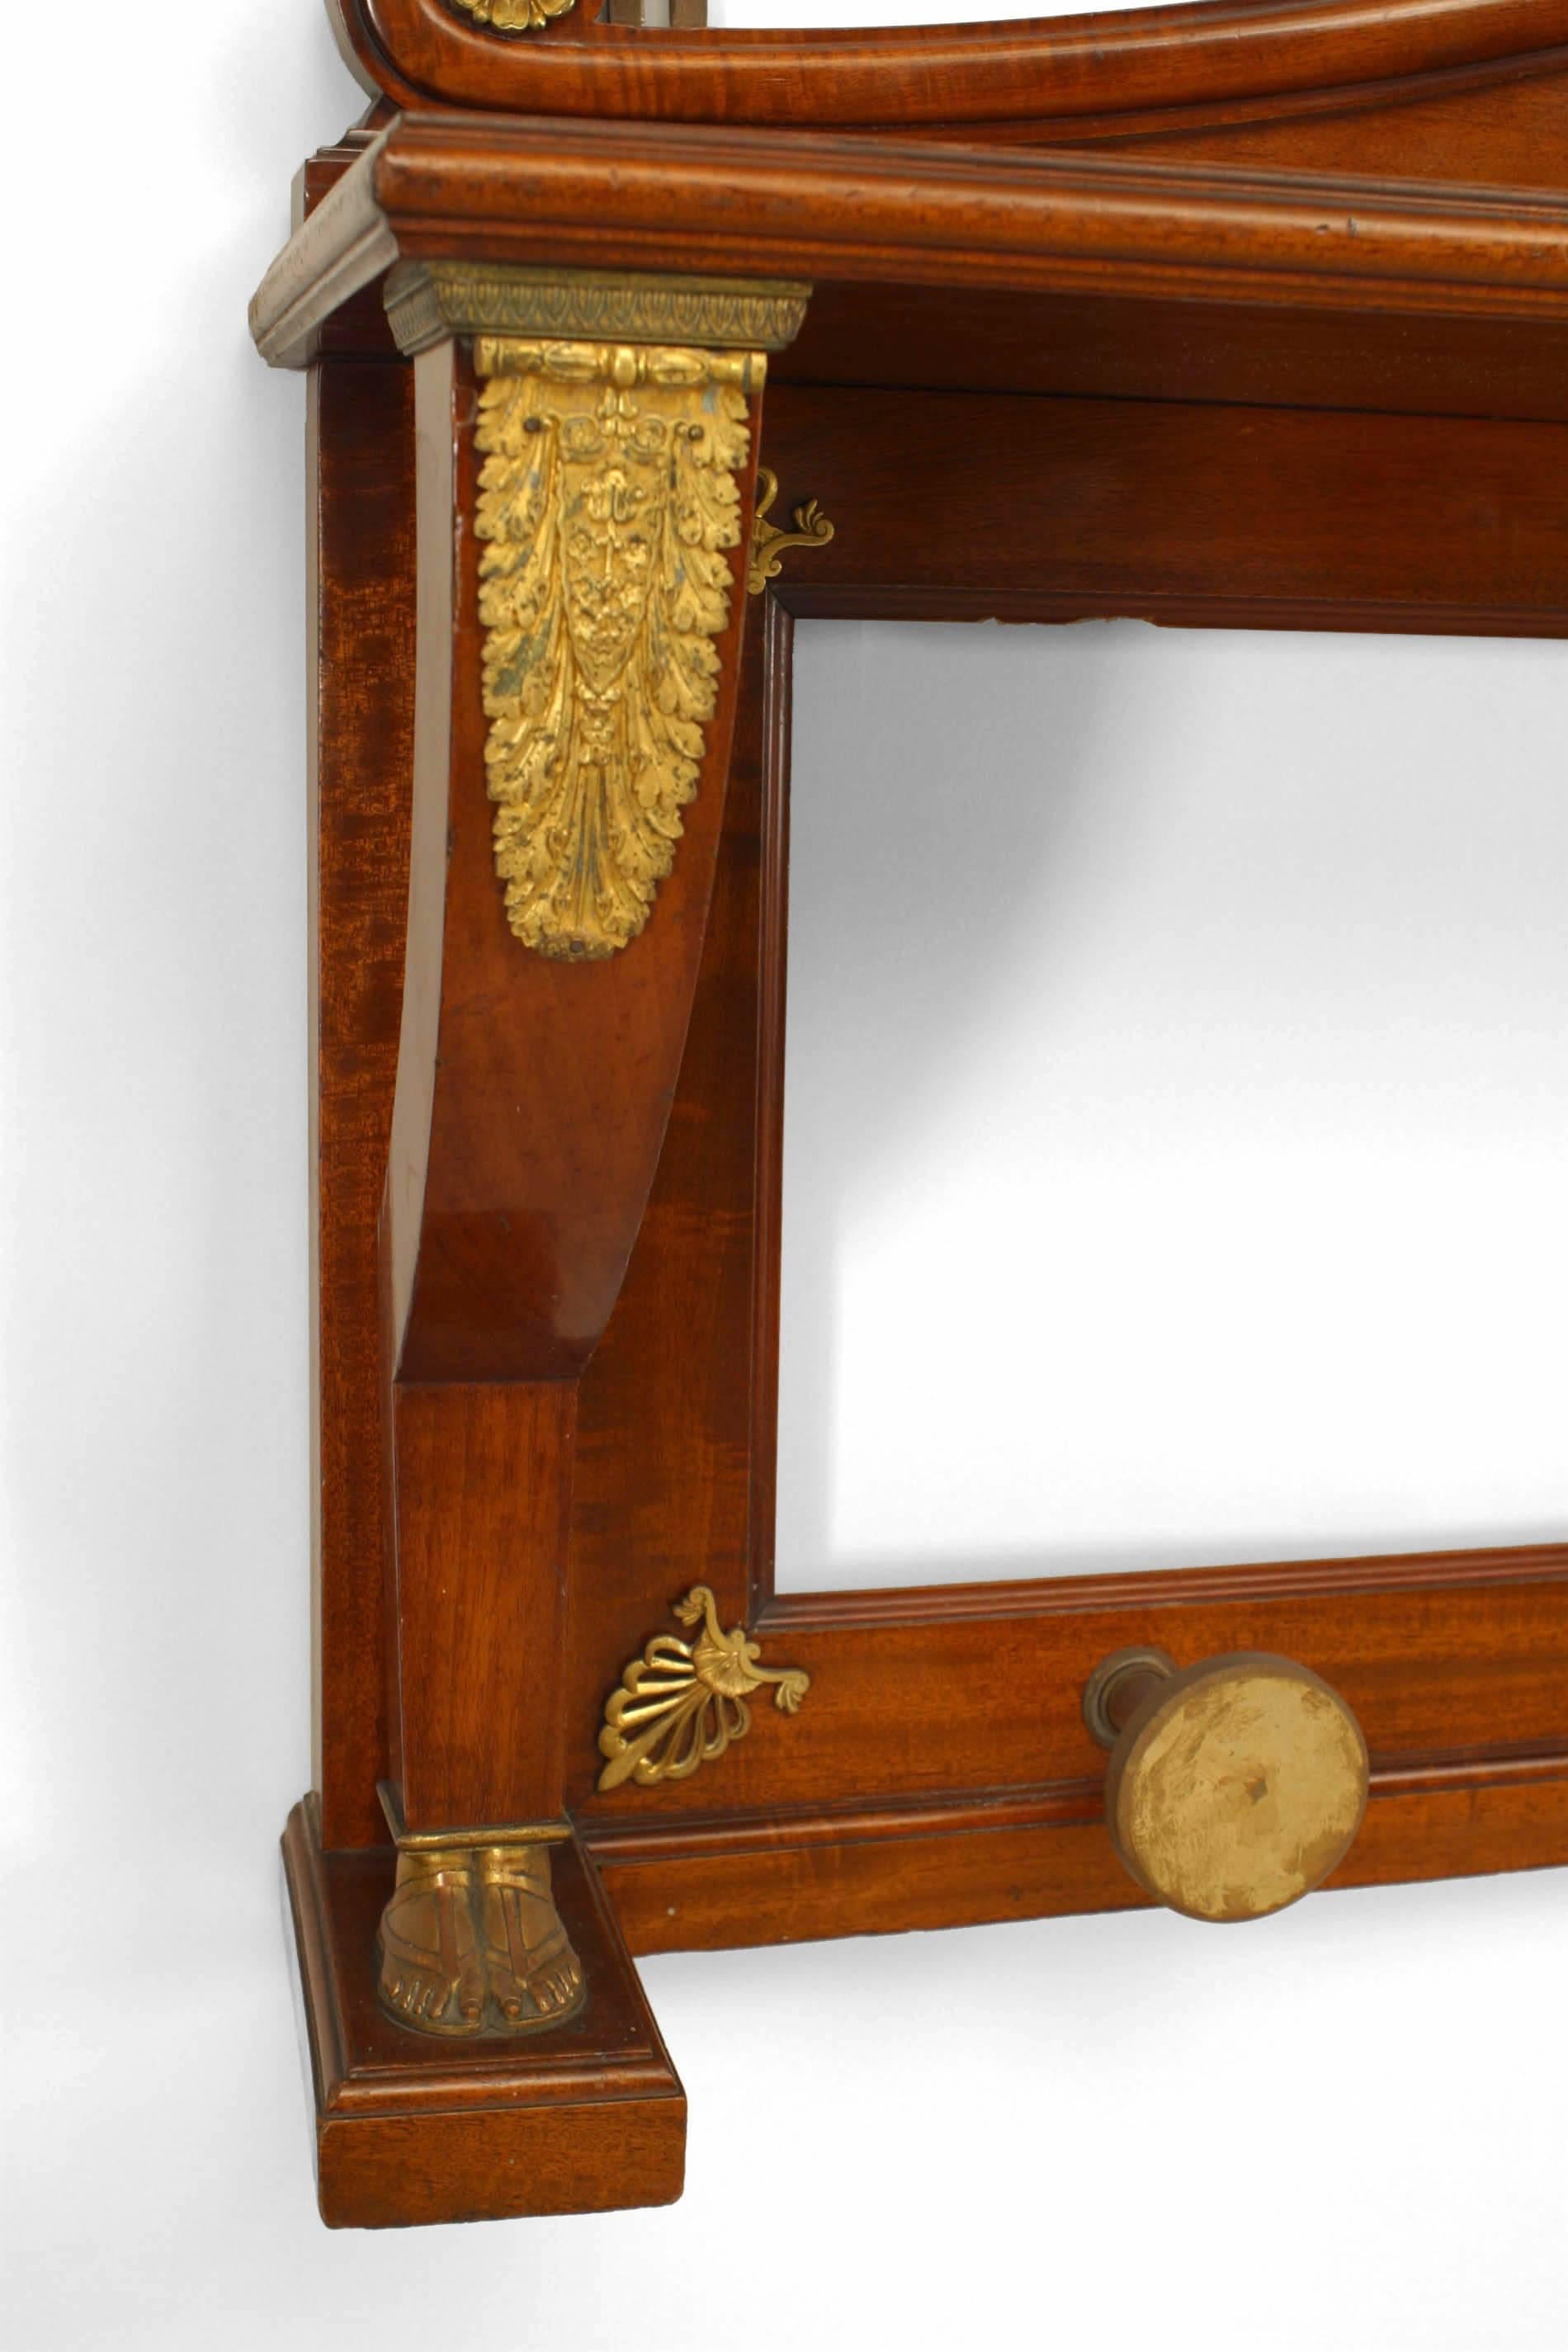 French Empire style horizontal mahogany and bronze trimmed wall hatrack with mirror under a shelf (19th Century).
 